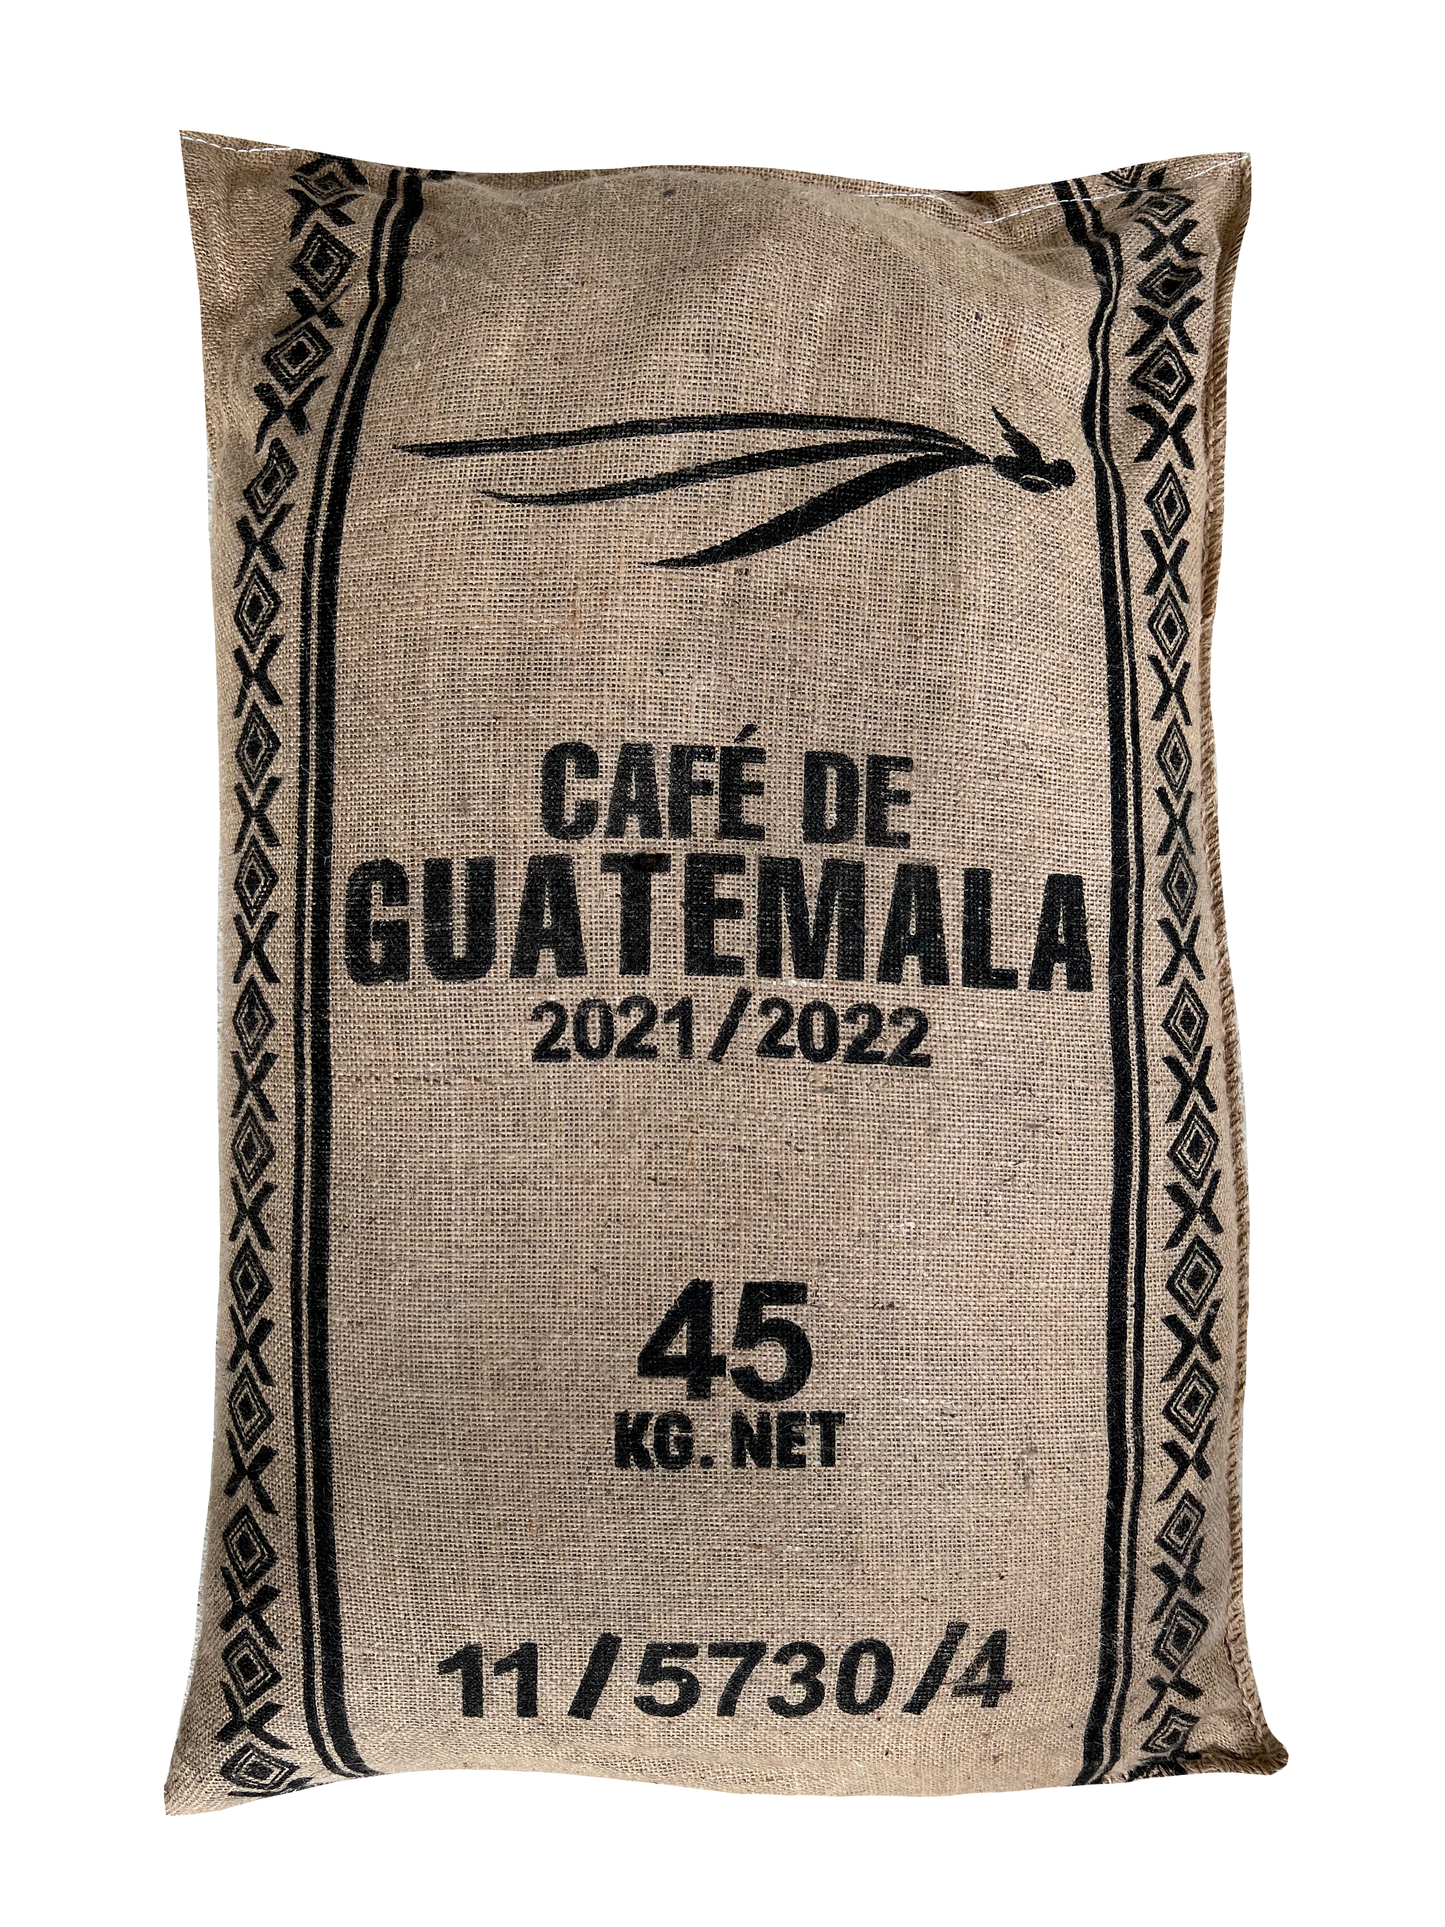 Kafetos beans HB Green Specialty unroasted arabica Guatemala – coffee